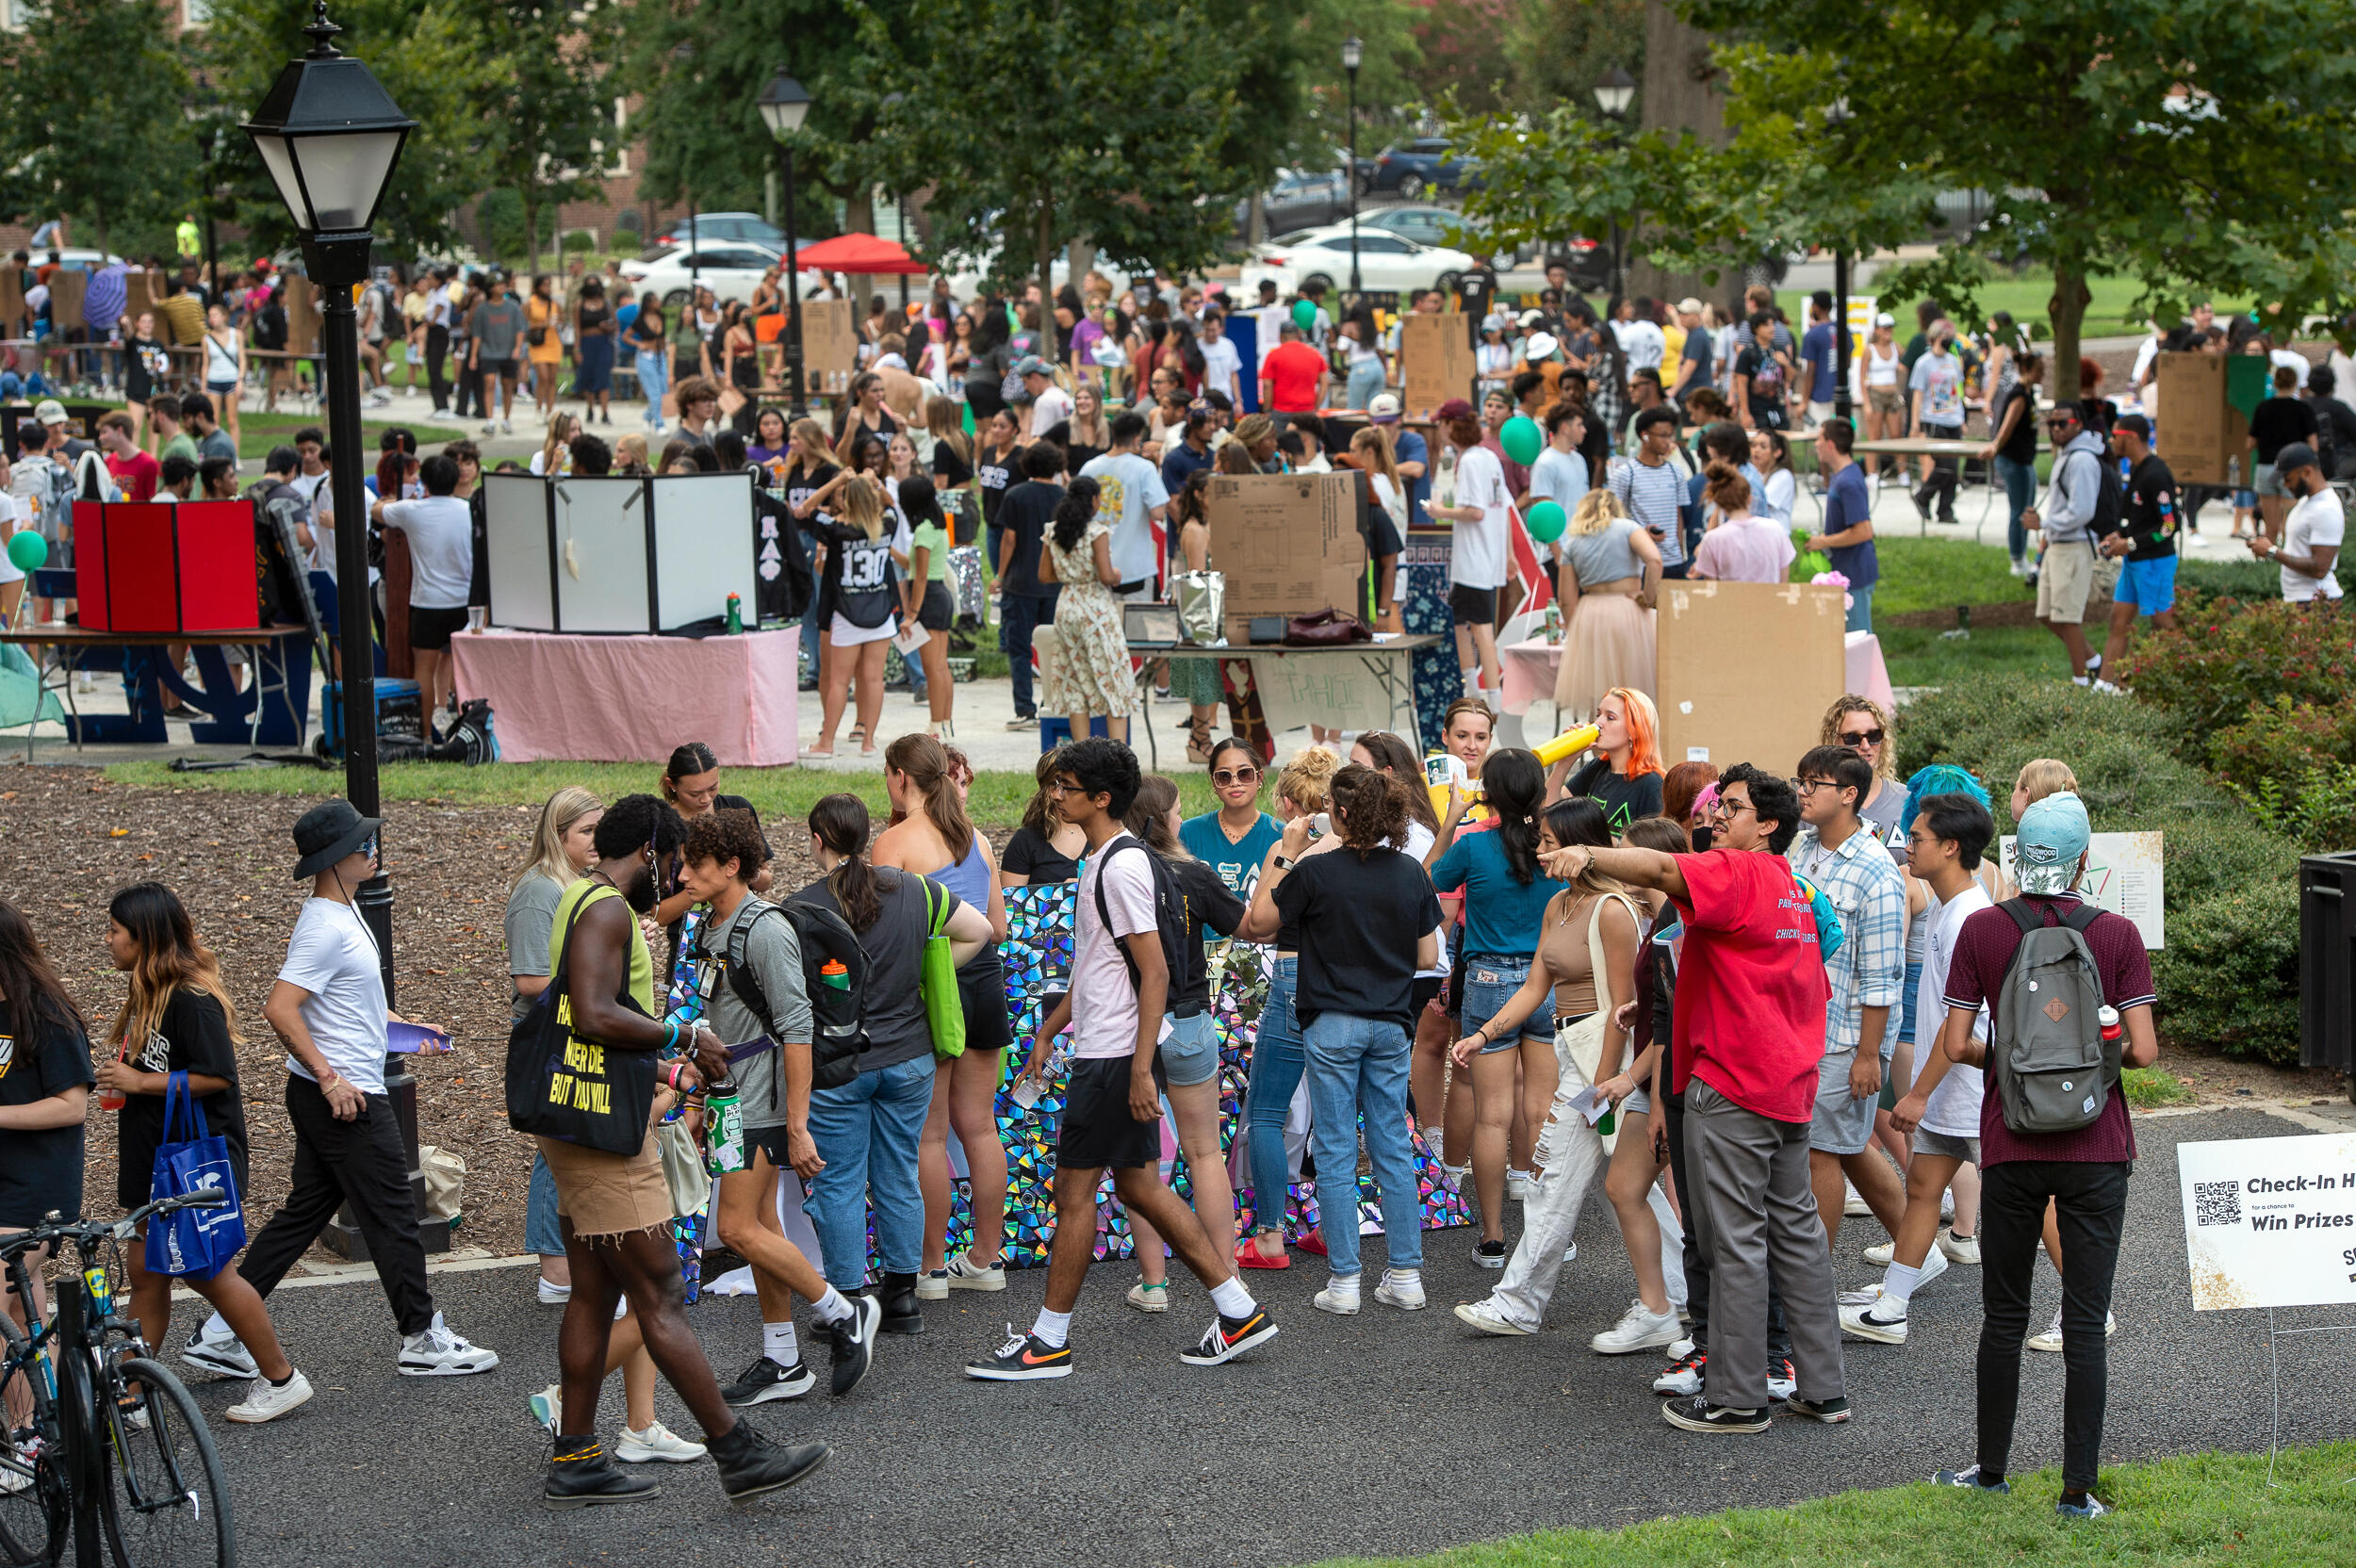 Hundreds of students walk around the sidewalks next to a tree-lined green space in Monroe Park.